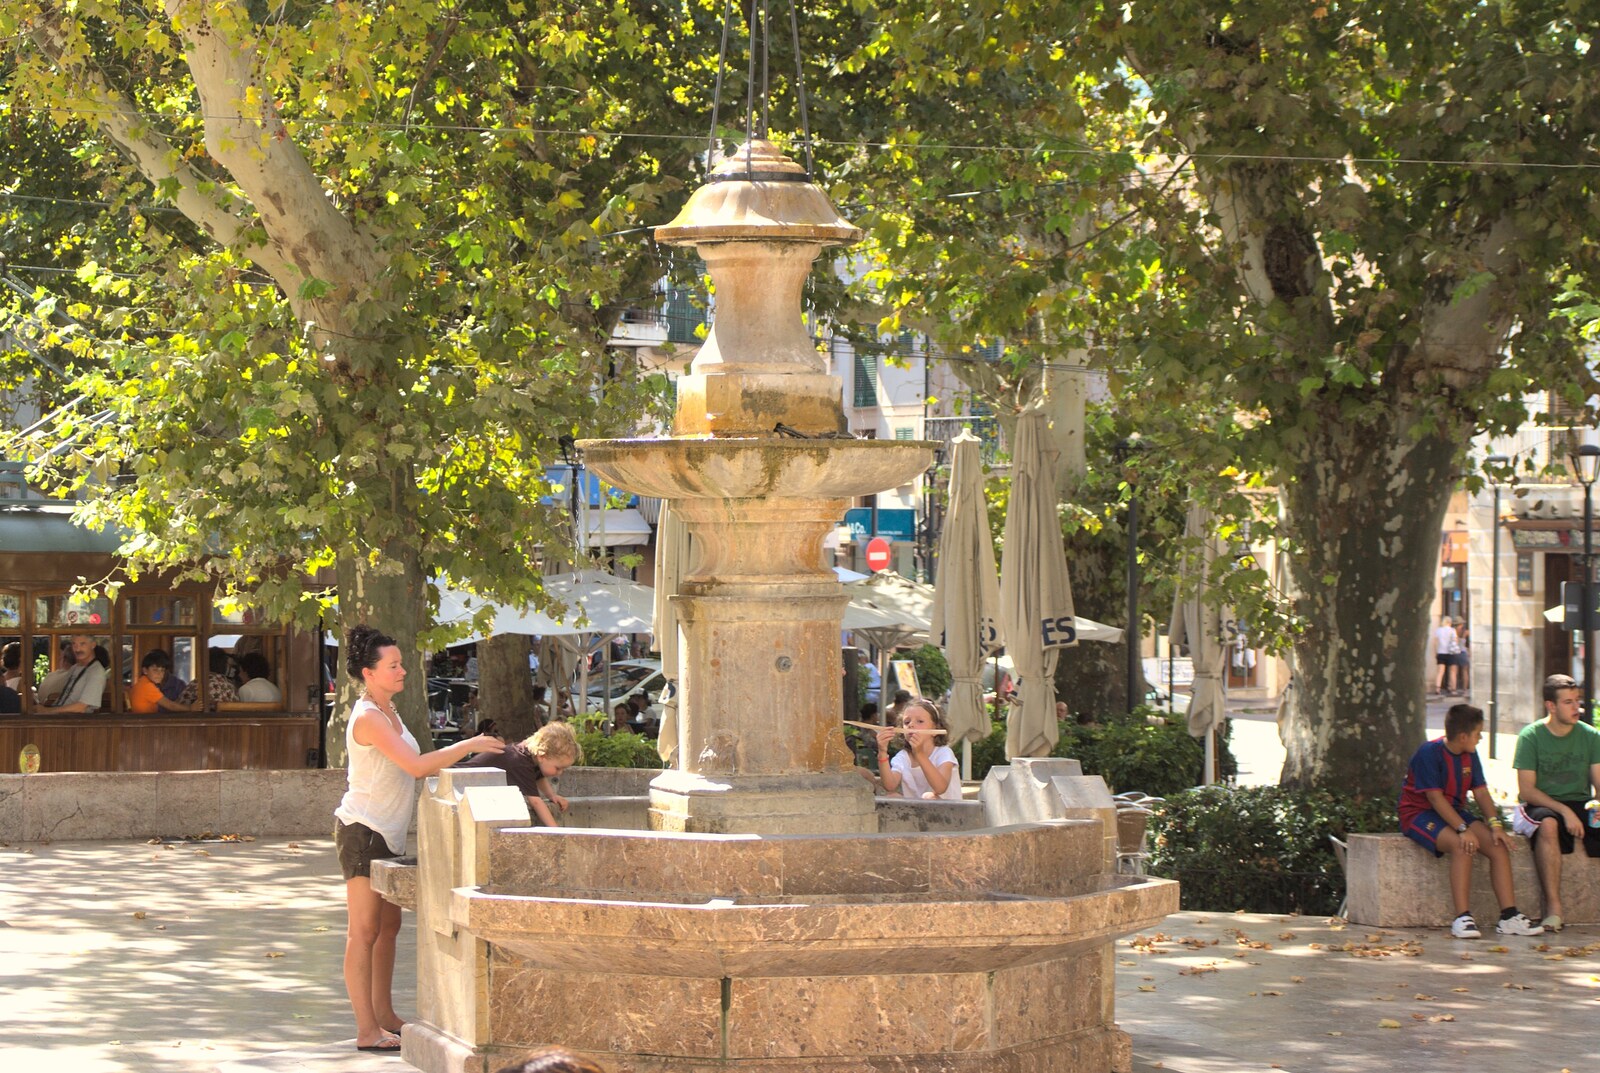 Fred splashes in the town fountain from A Tram Trip to Port Soller, Mallorca - 18th August 2011